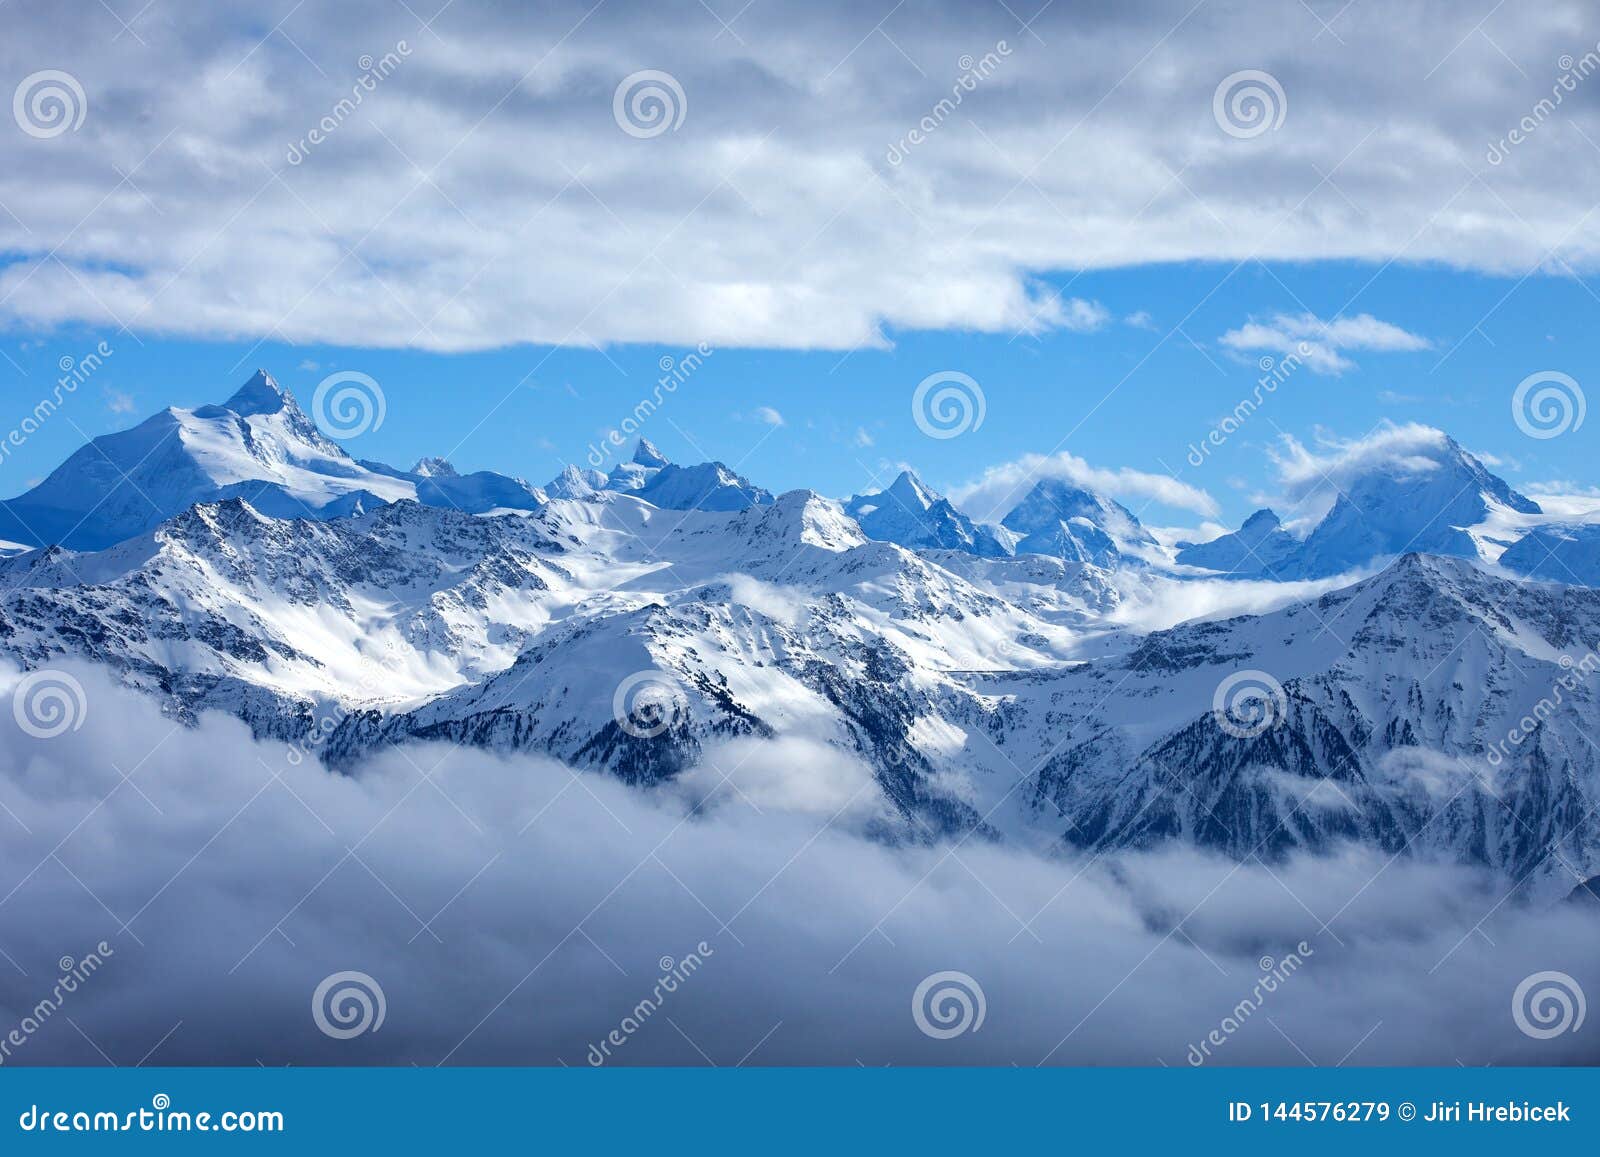 Swiss Alps Scenery. Winter Mountains. Beautiful Nature Scenery in Winter.  Mountain Covered by Snow, Glacier Stock Image - Image of blue, outdoors:  144576279